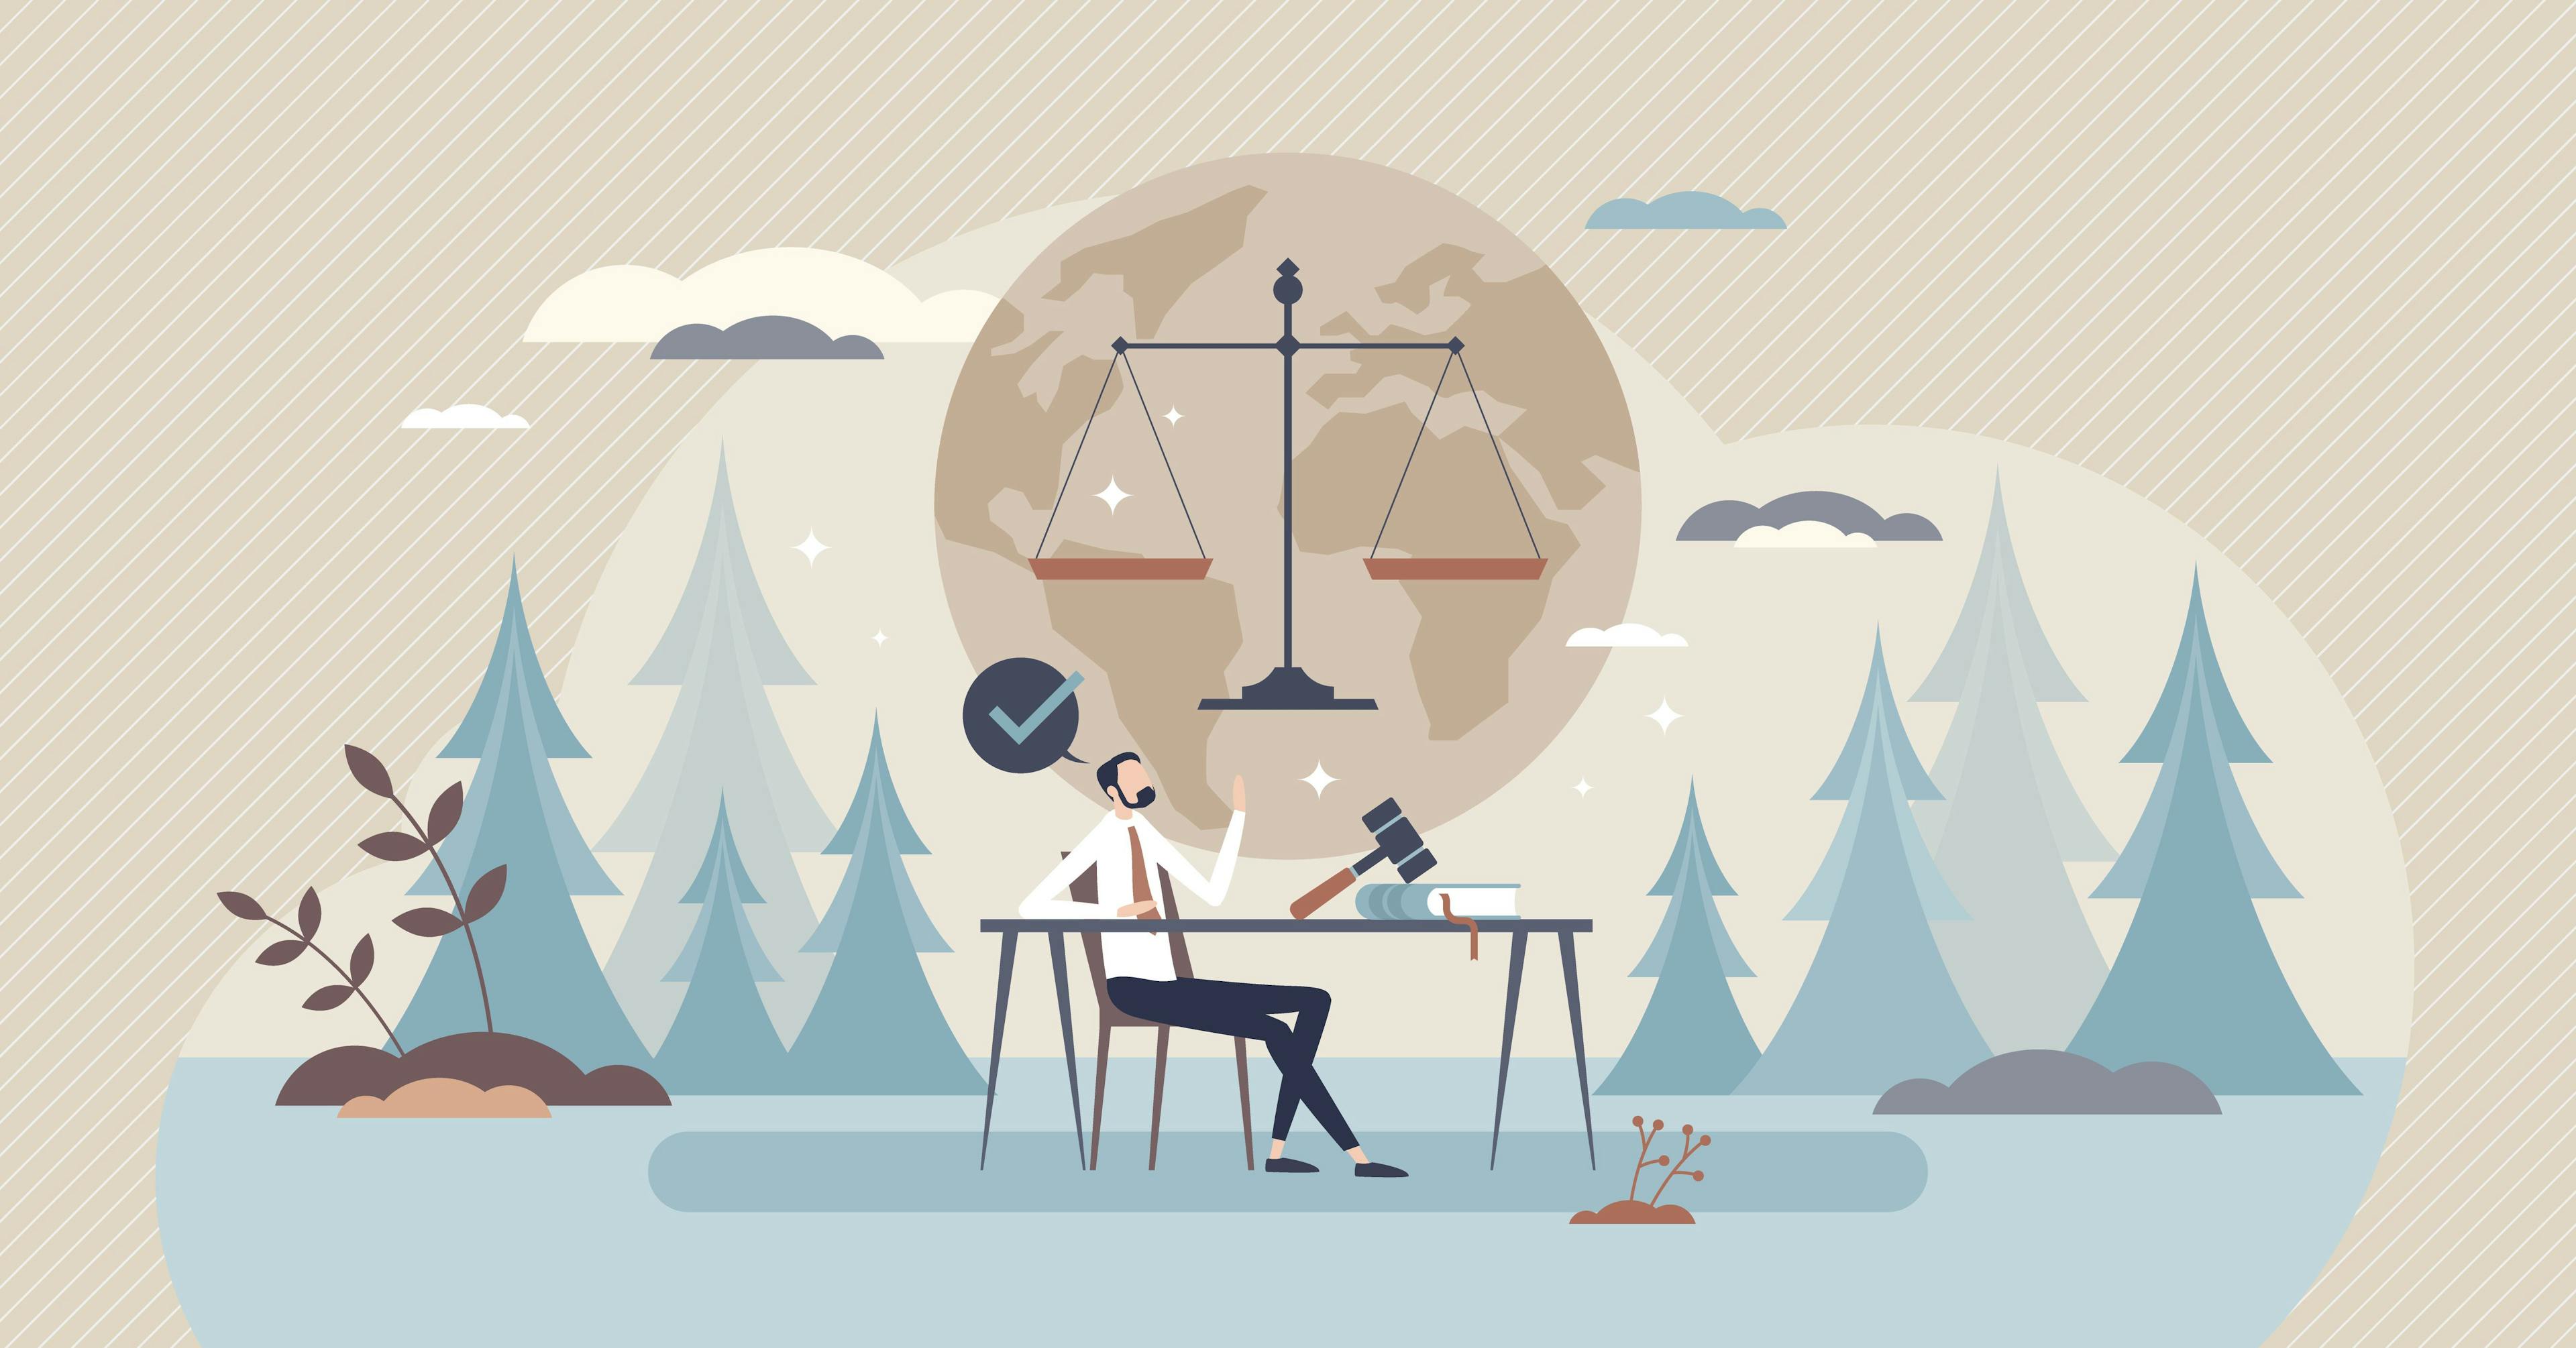 It is not guaranteed climate litigation will always have standing in court and merely depends on the region, case argument, and laws in place.  | Image Credit: VectorMine - stock.adobe.com